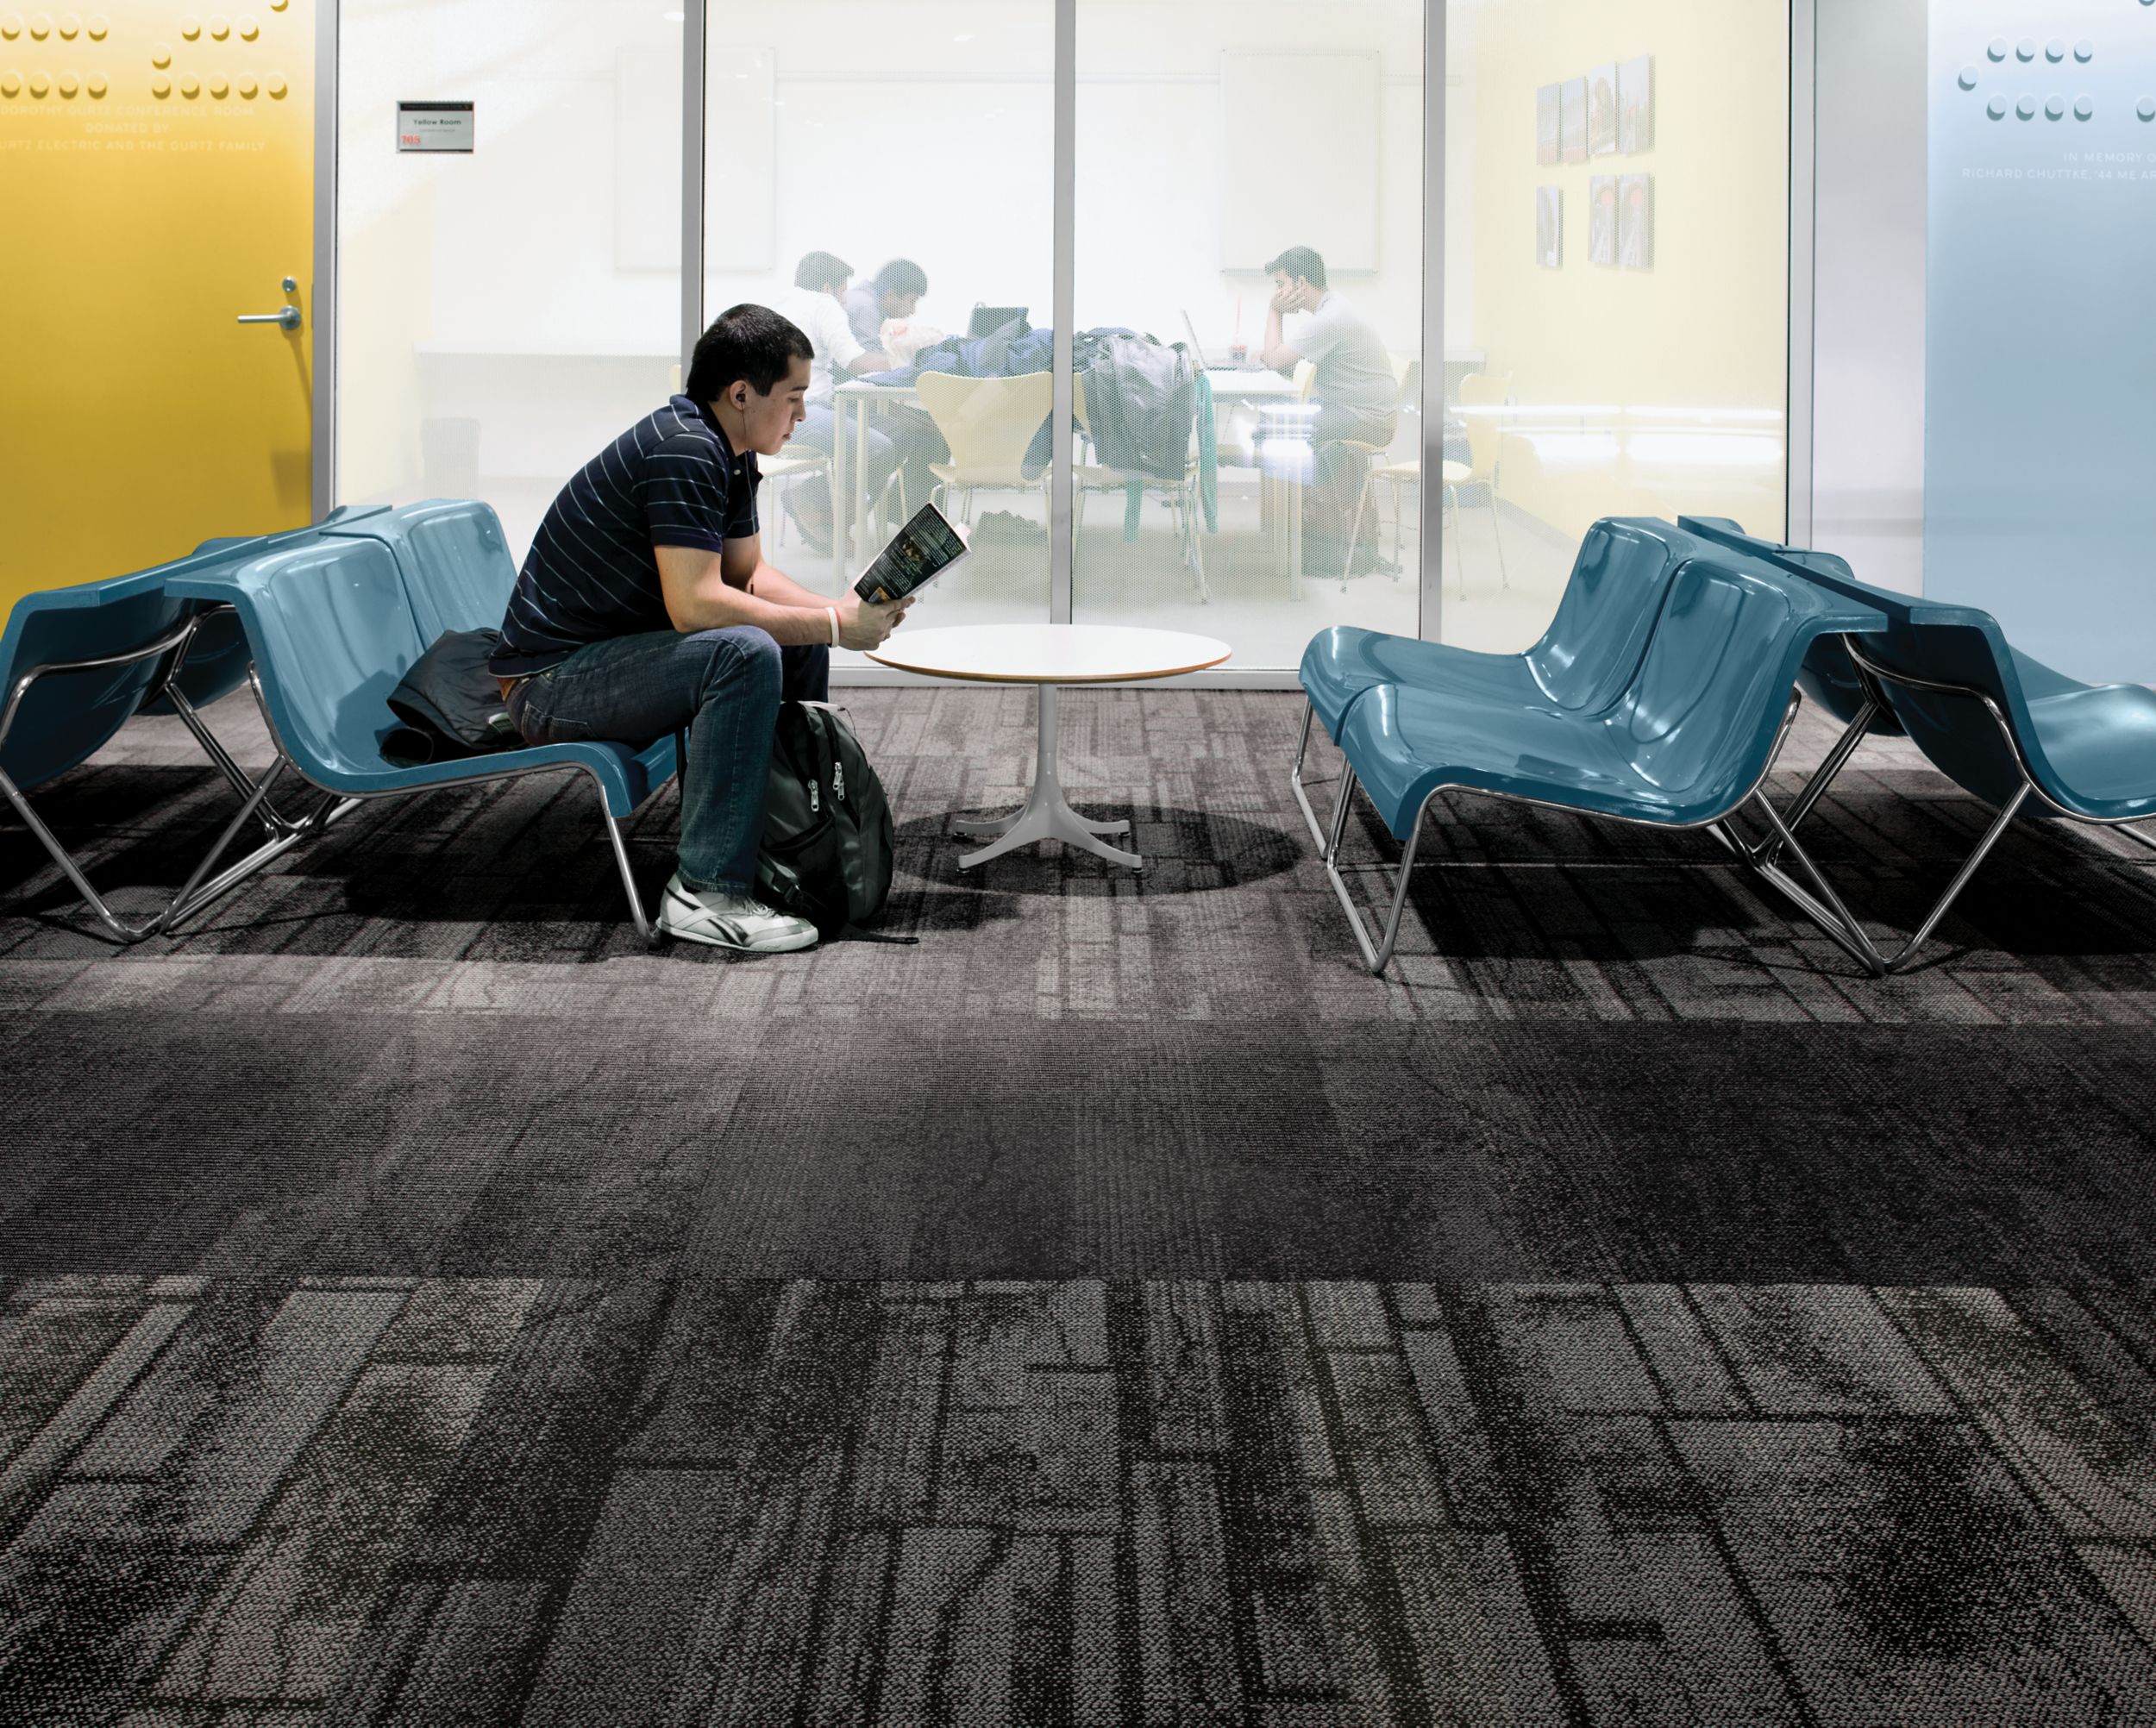 Interface Neighborhood Blocks and Neighborhood Smooth plank carpet tile in public education space with man reading a book on blue chair imagen número 10